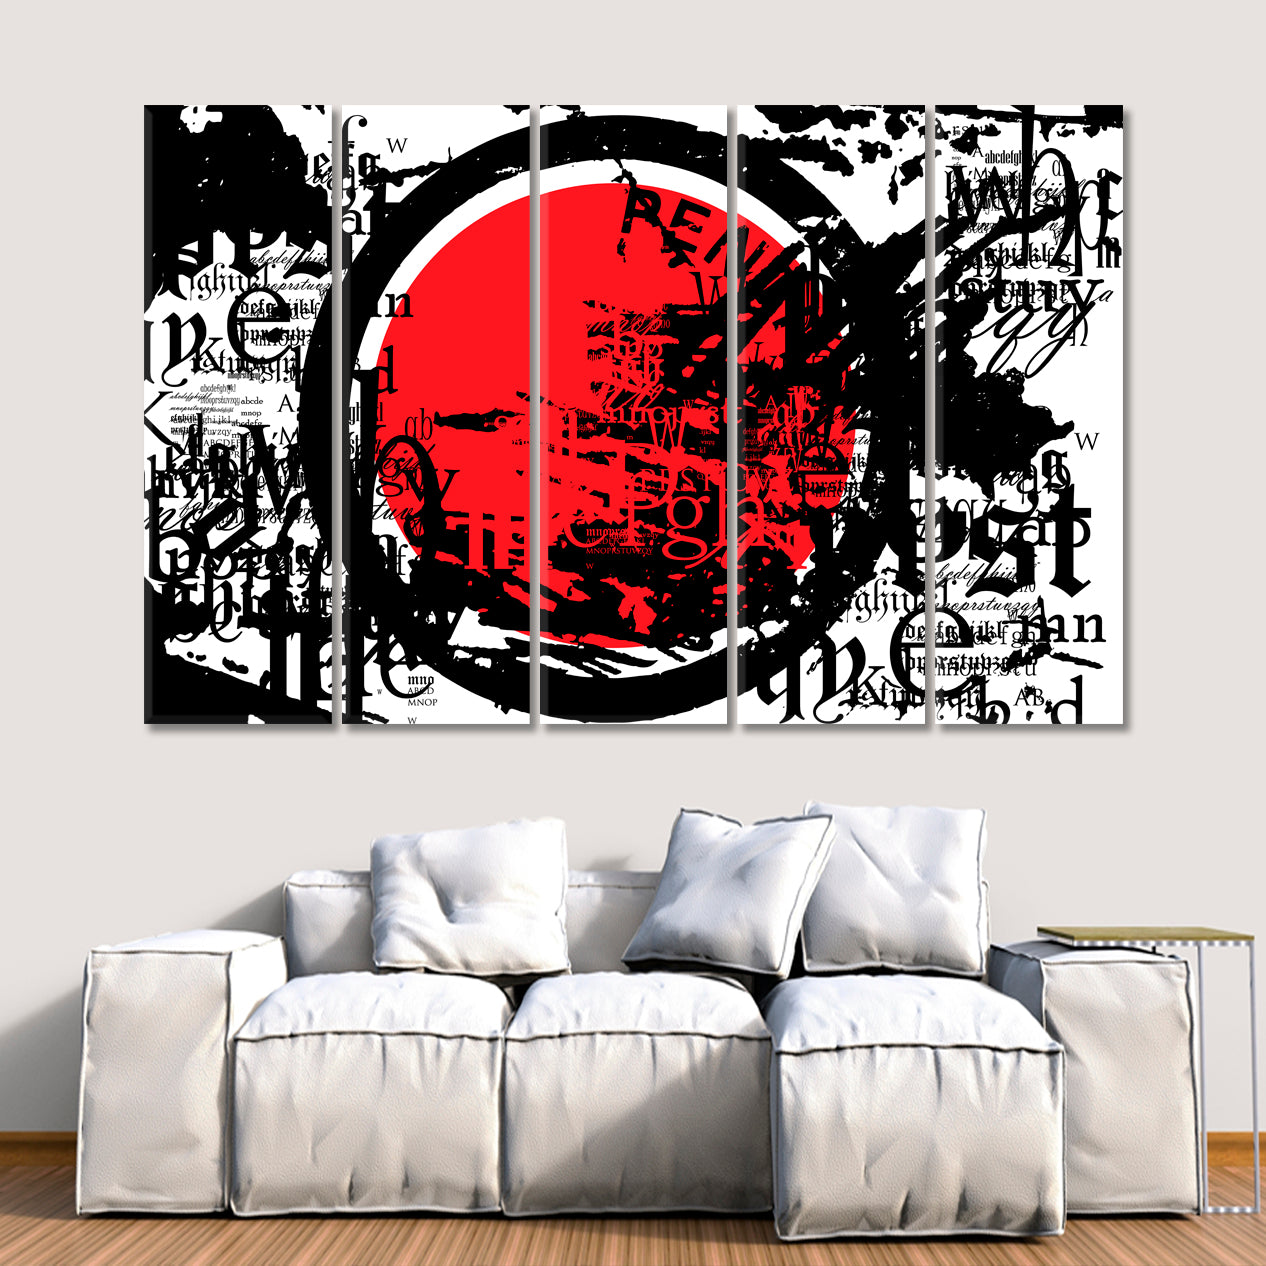 GRUNGE Modern Abstract Black Red White Asian Style Canvas Print Wall Art Artesty 5 panels 36" x 24" 